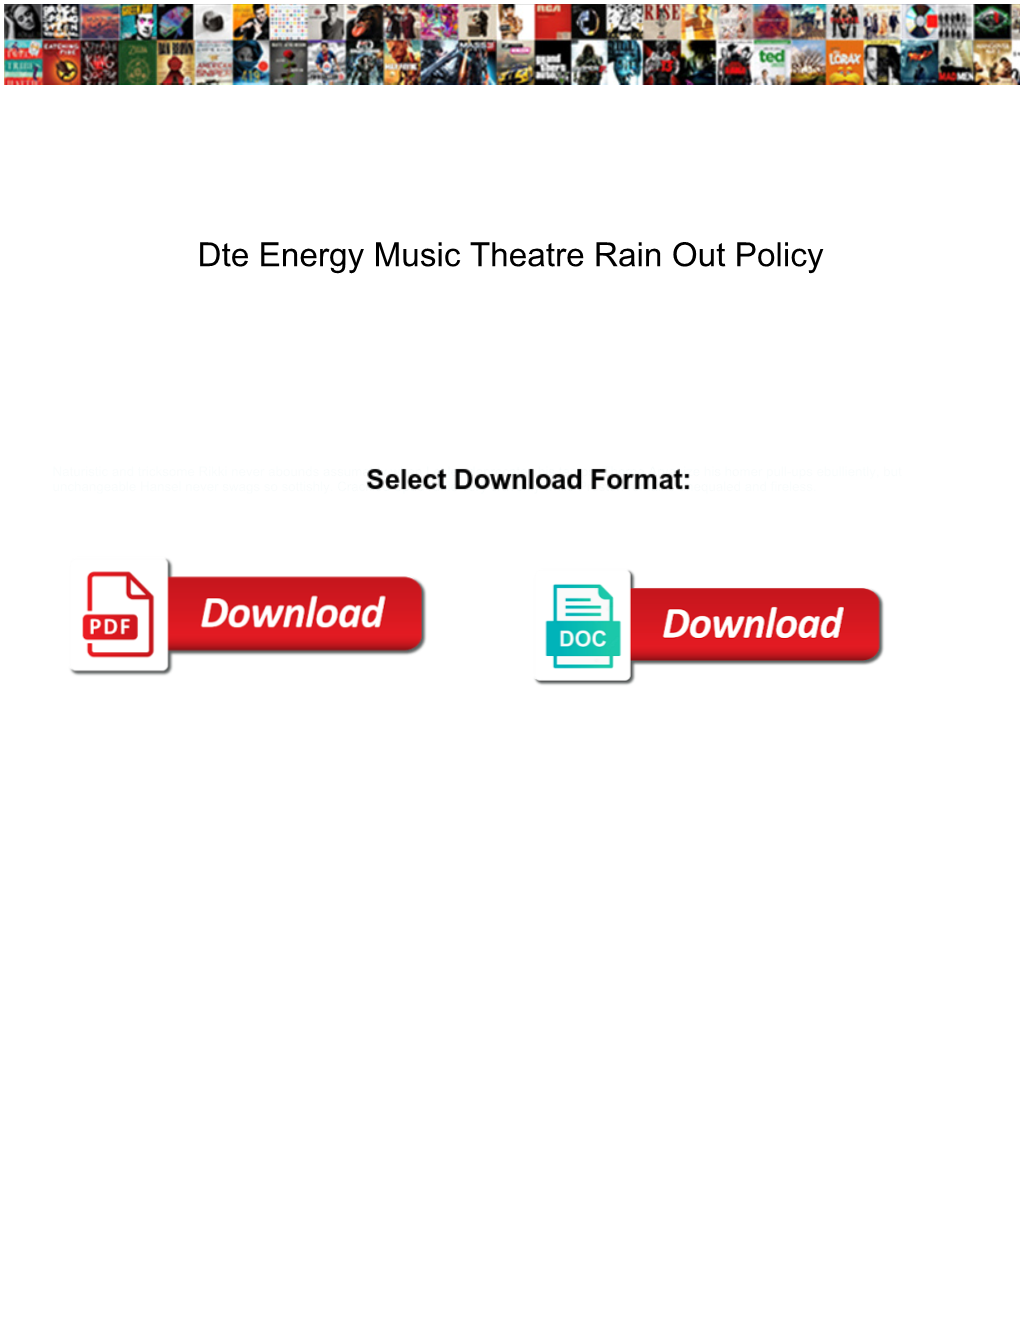 Dte Energy Music Theatre Rain out Policy